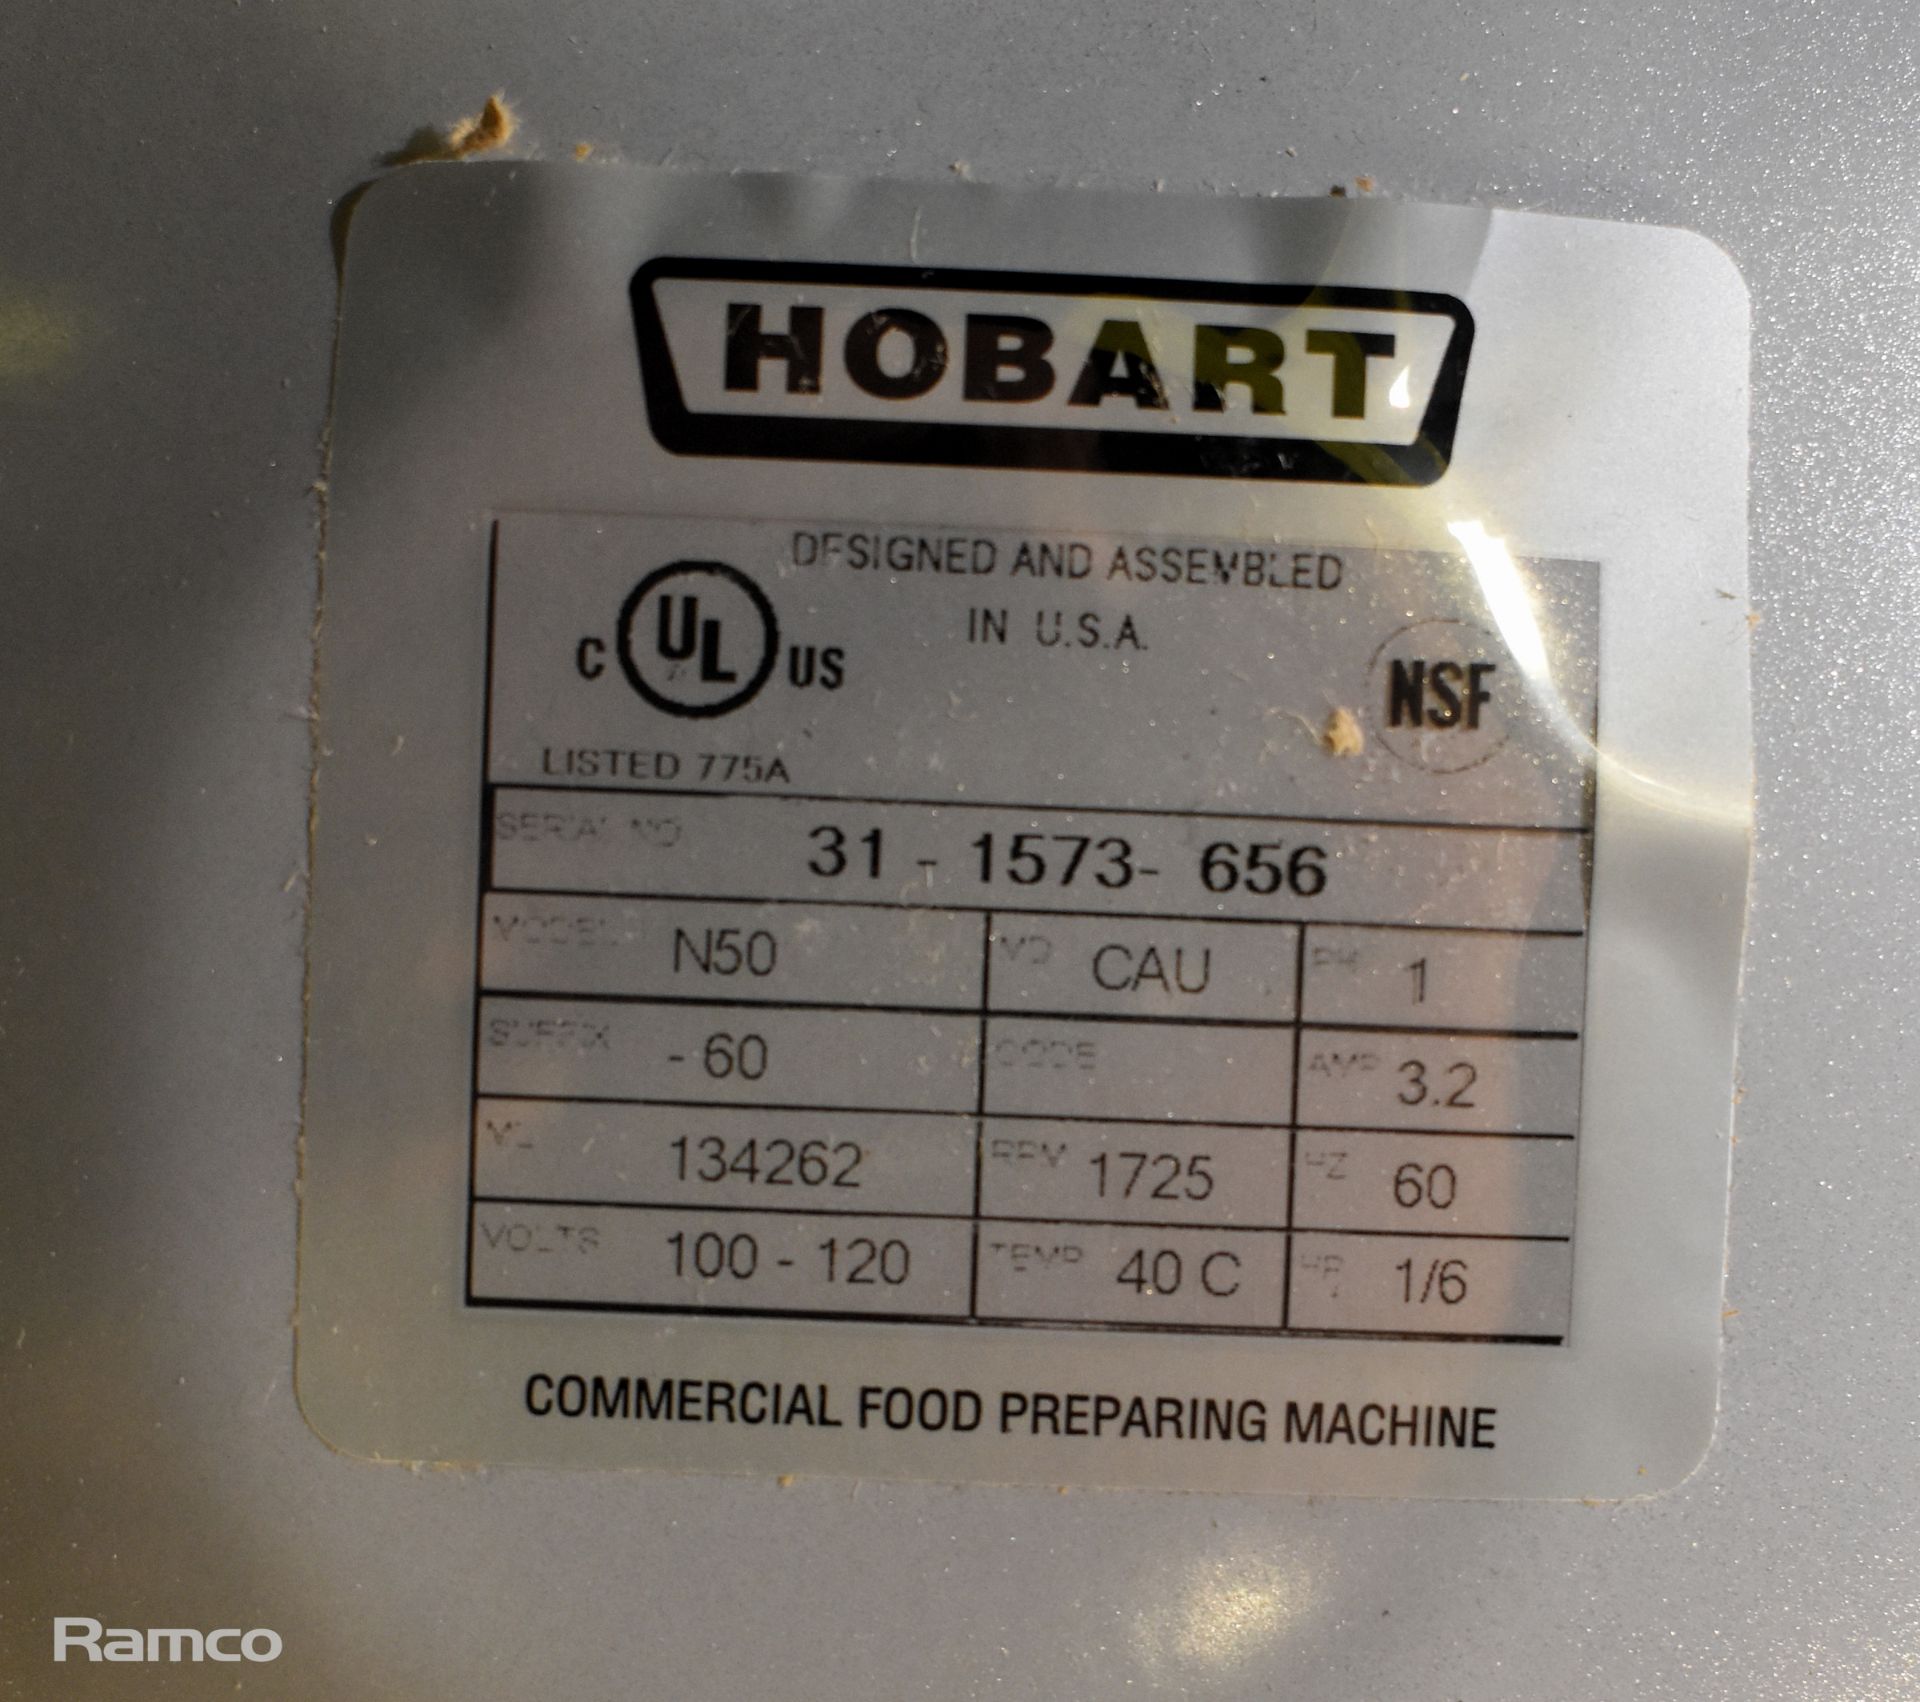 Hobart N50 small food mixer with accessories - 100-120V - 1ph - 60Hz - W 270 x D 380 x H 430mm - Image 10 of 10